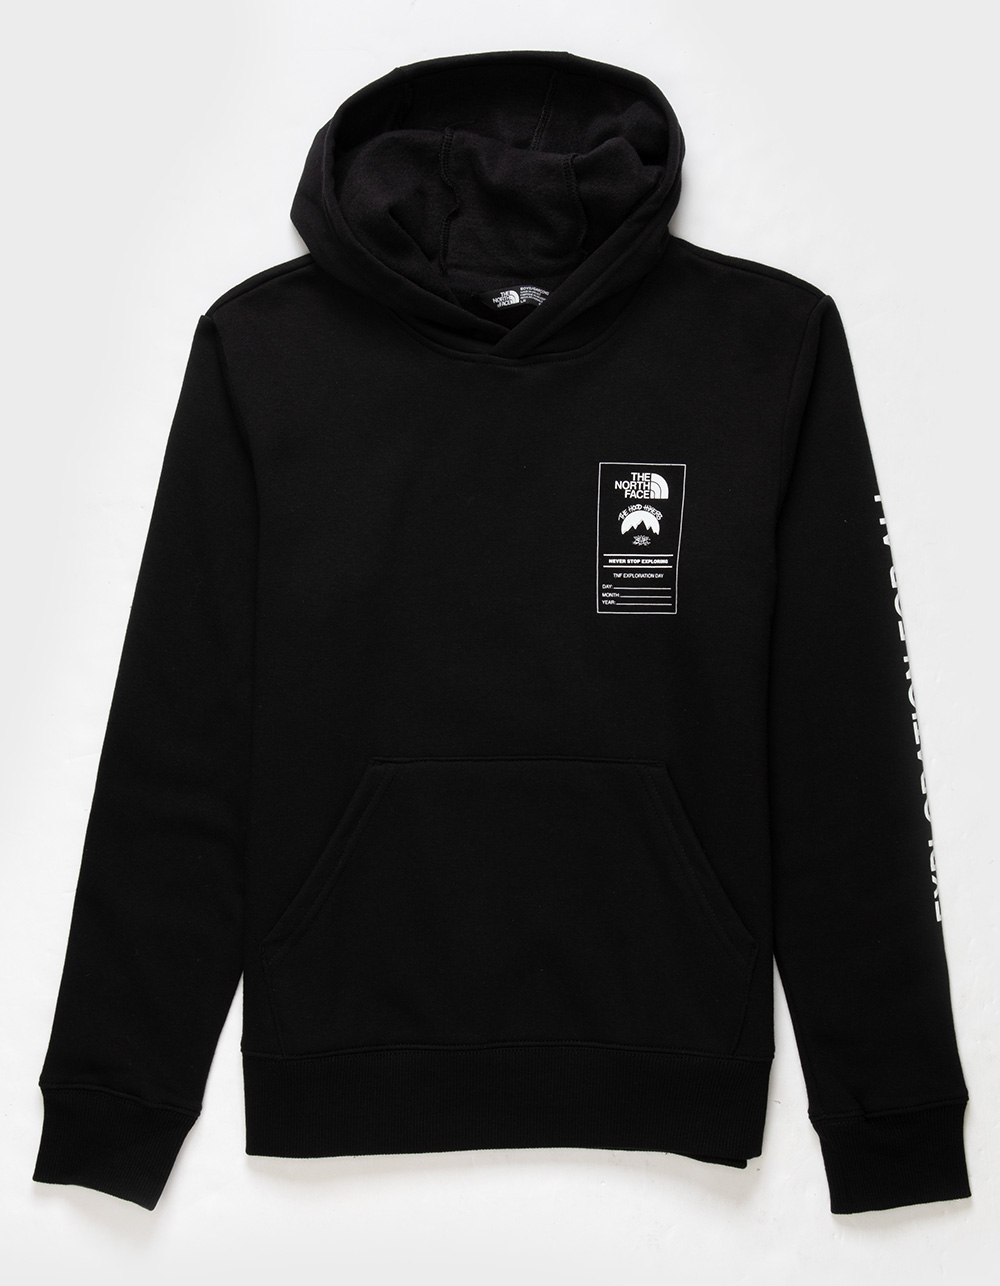 THE NORTH FACE Graphic Boys Hoodie - BLK/WHT | Tillys